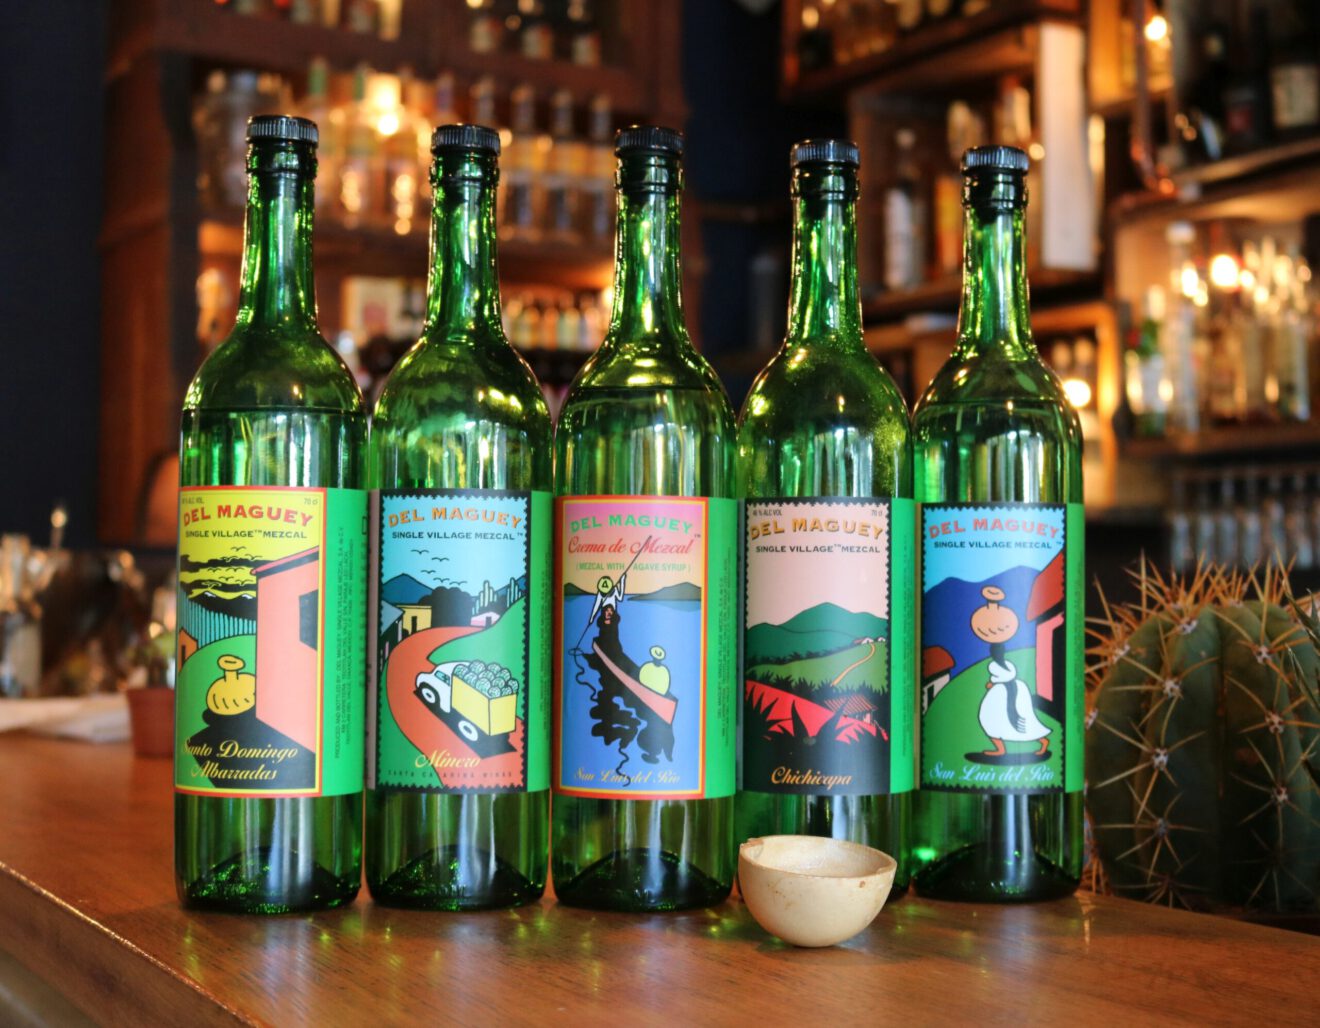 Mezcal makes inroads in the US